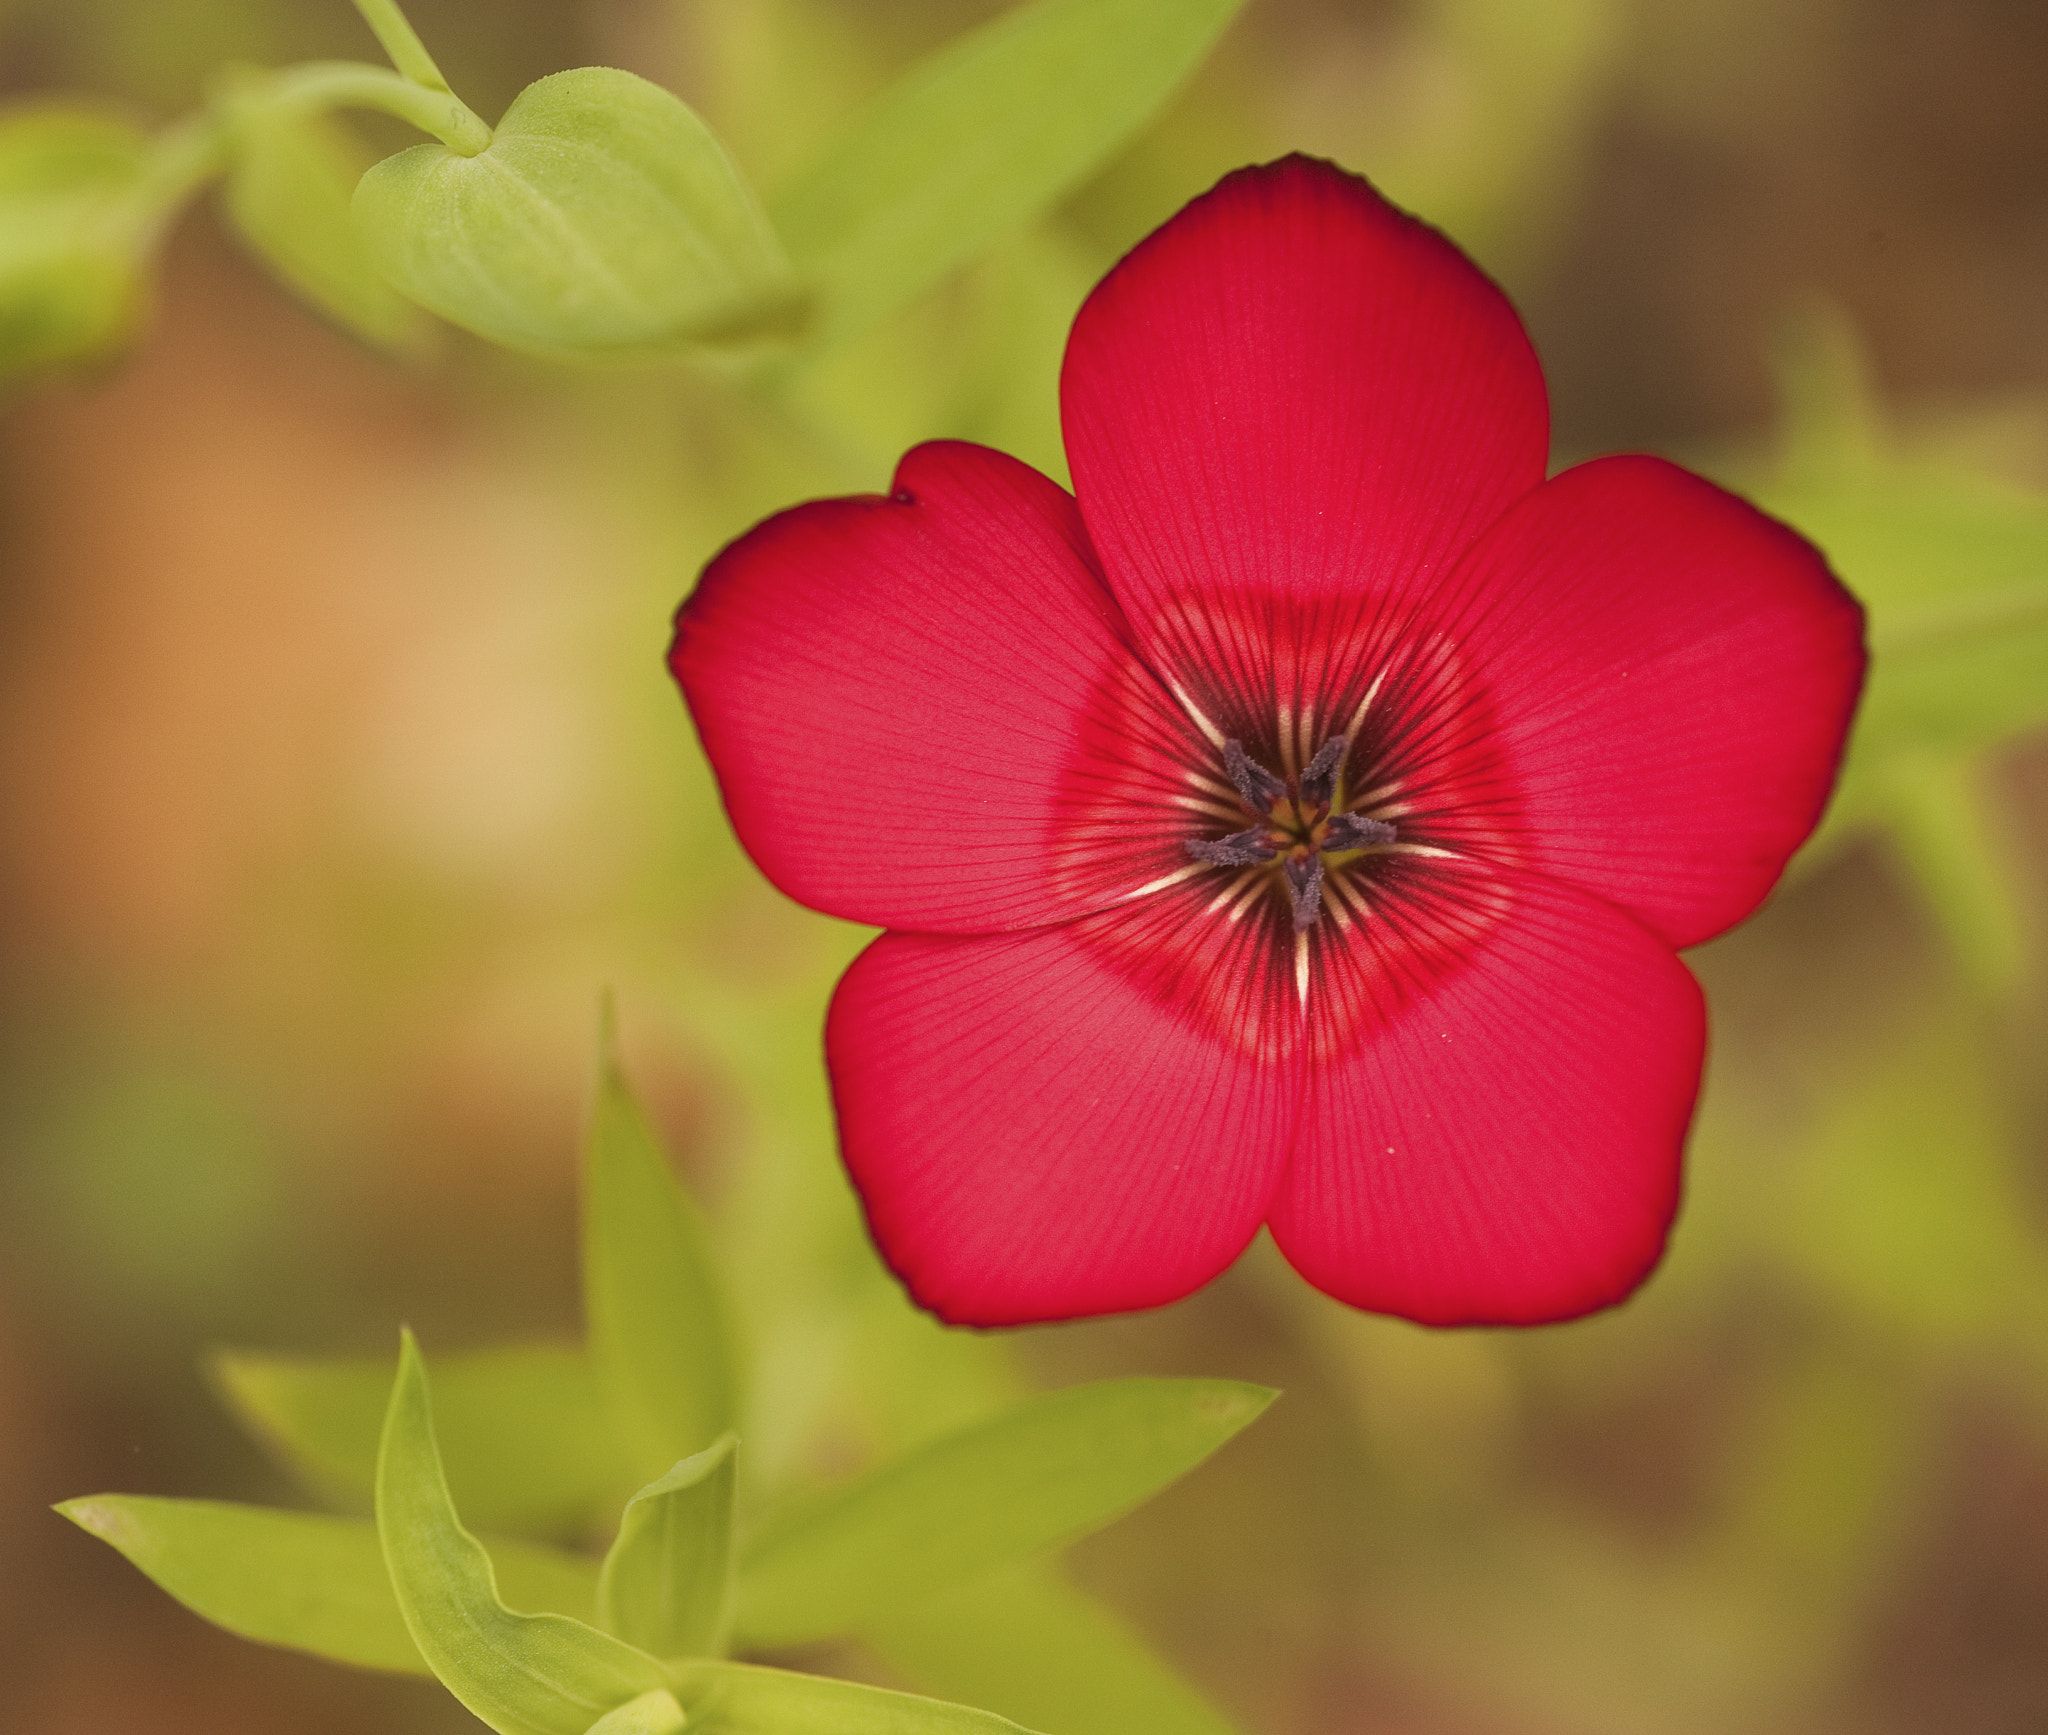 Nikon D700 + Sigma 105mm F2.8 EX DG Macro sample photo. Vibrant deep red wild flower with shallow depth of field photography